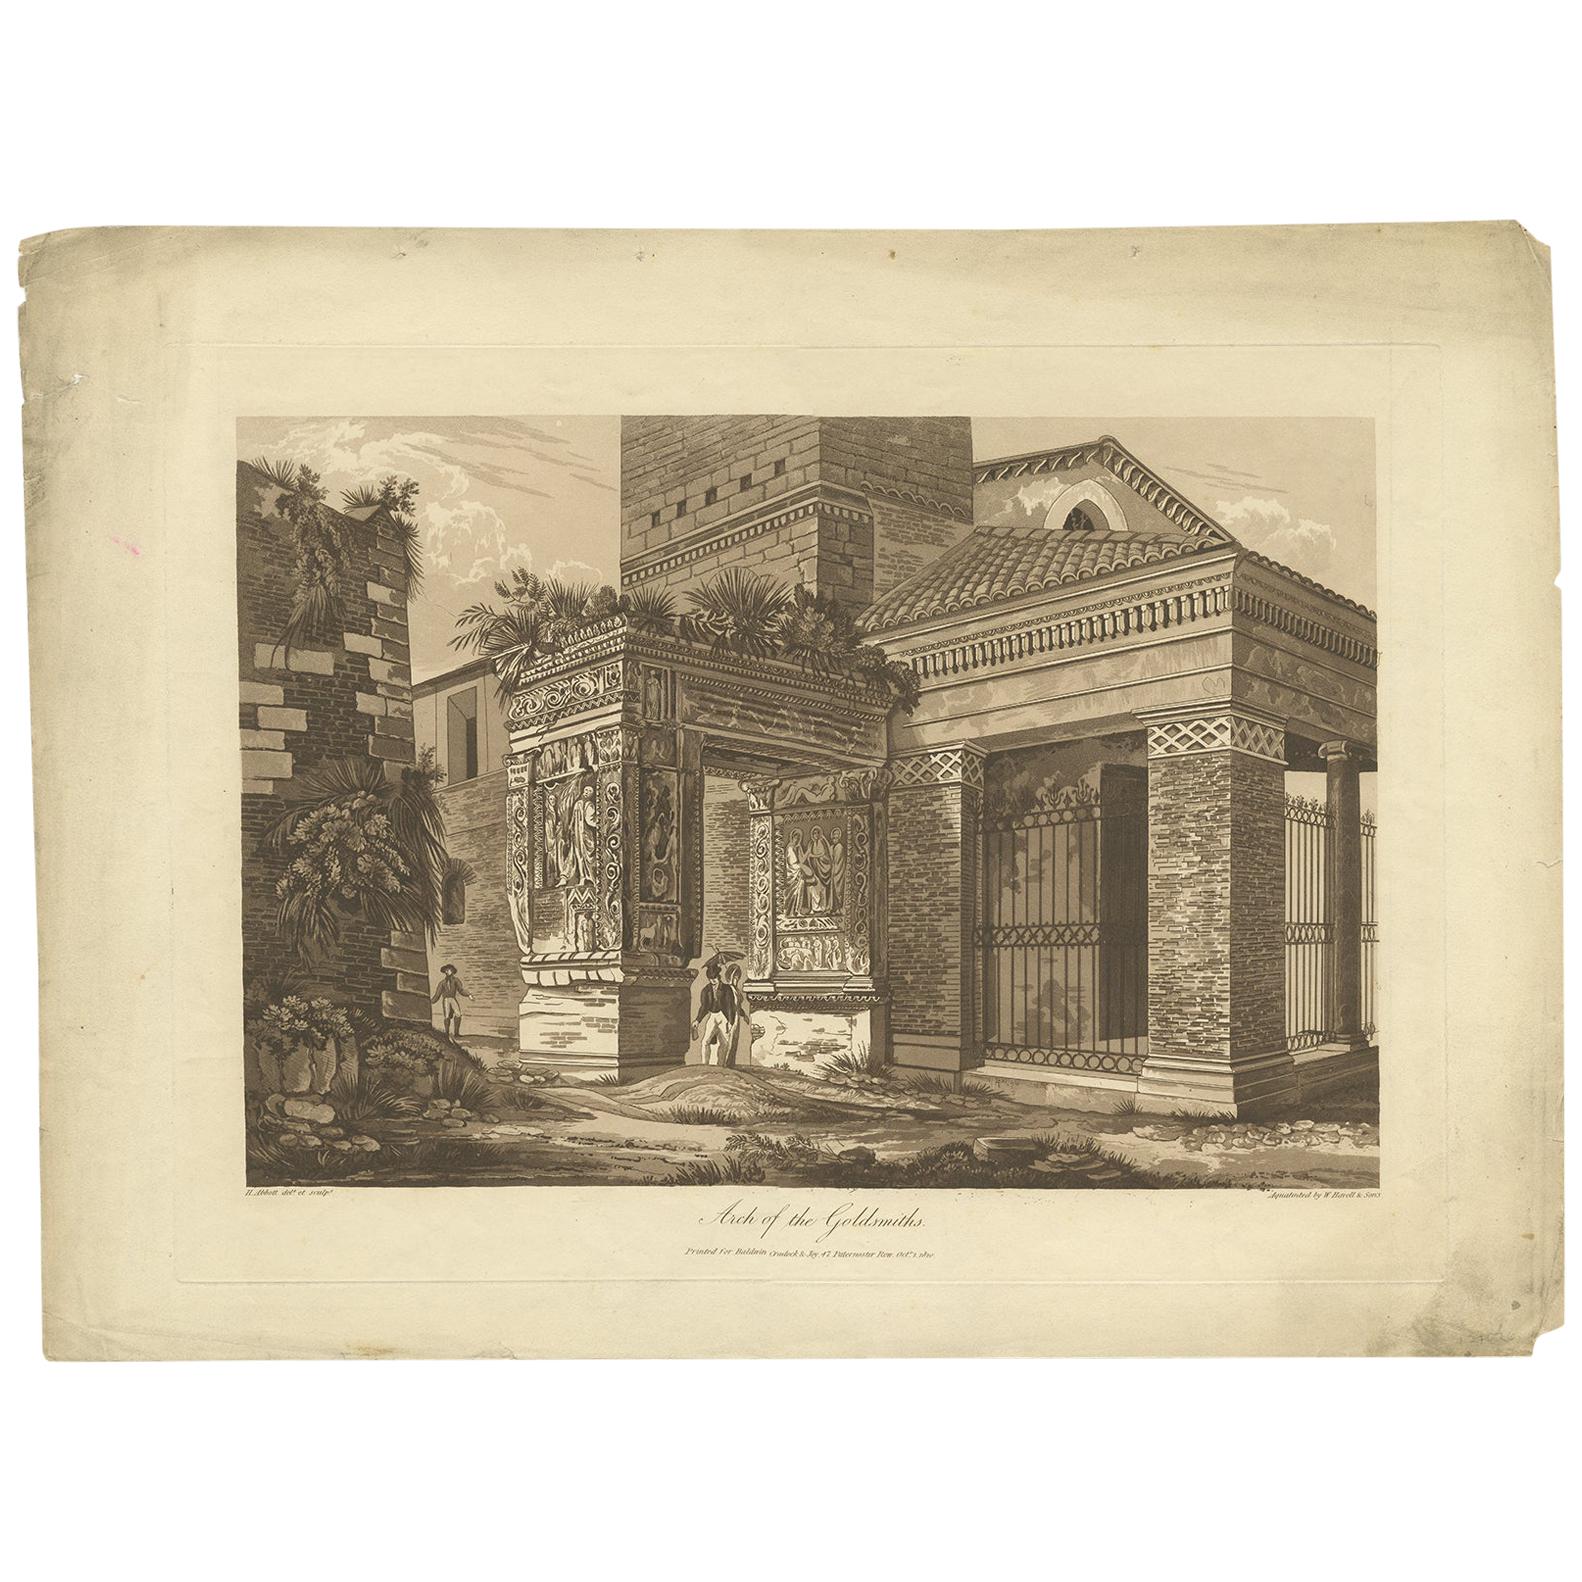 Antique Print of the Arch of the Goldsmith by Abbot, 1820